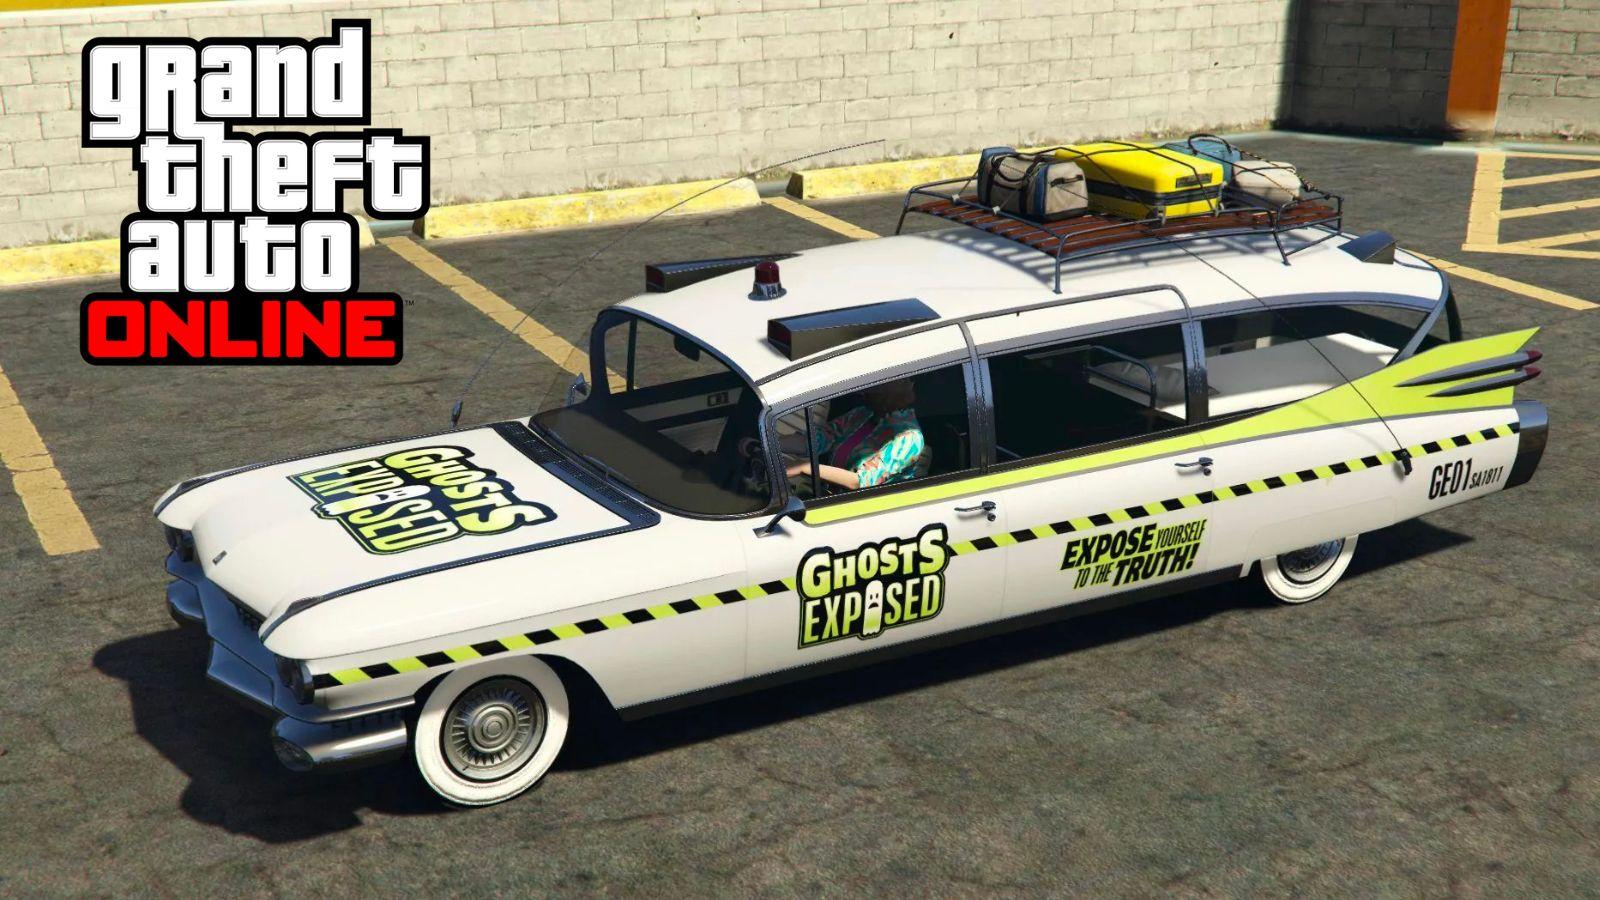 GTA Online car with ghostbusters-themed livery